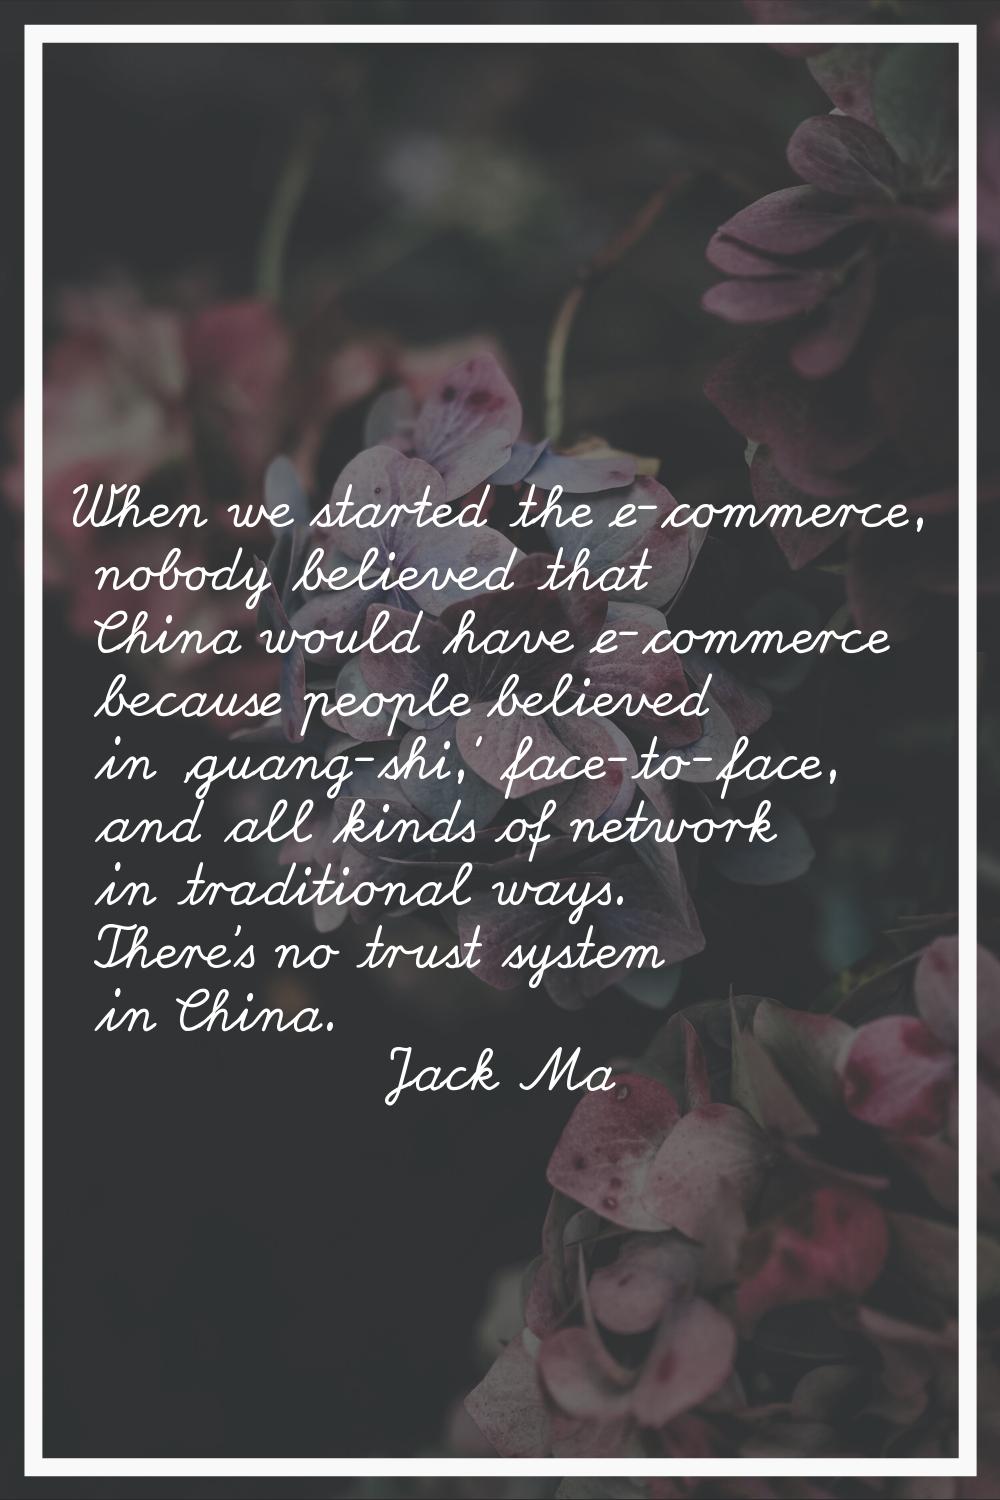 When we started the e-commerce, nobody believed that China would have e-commerce because people bel